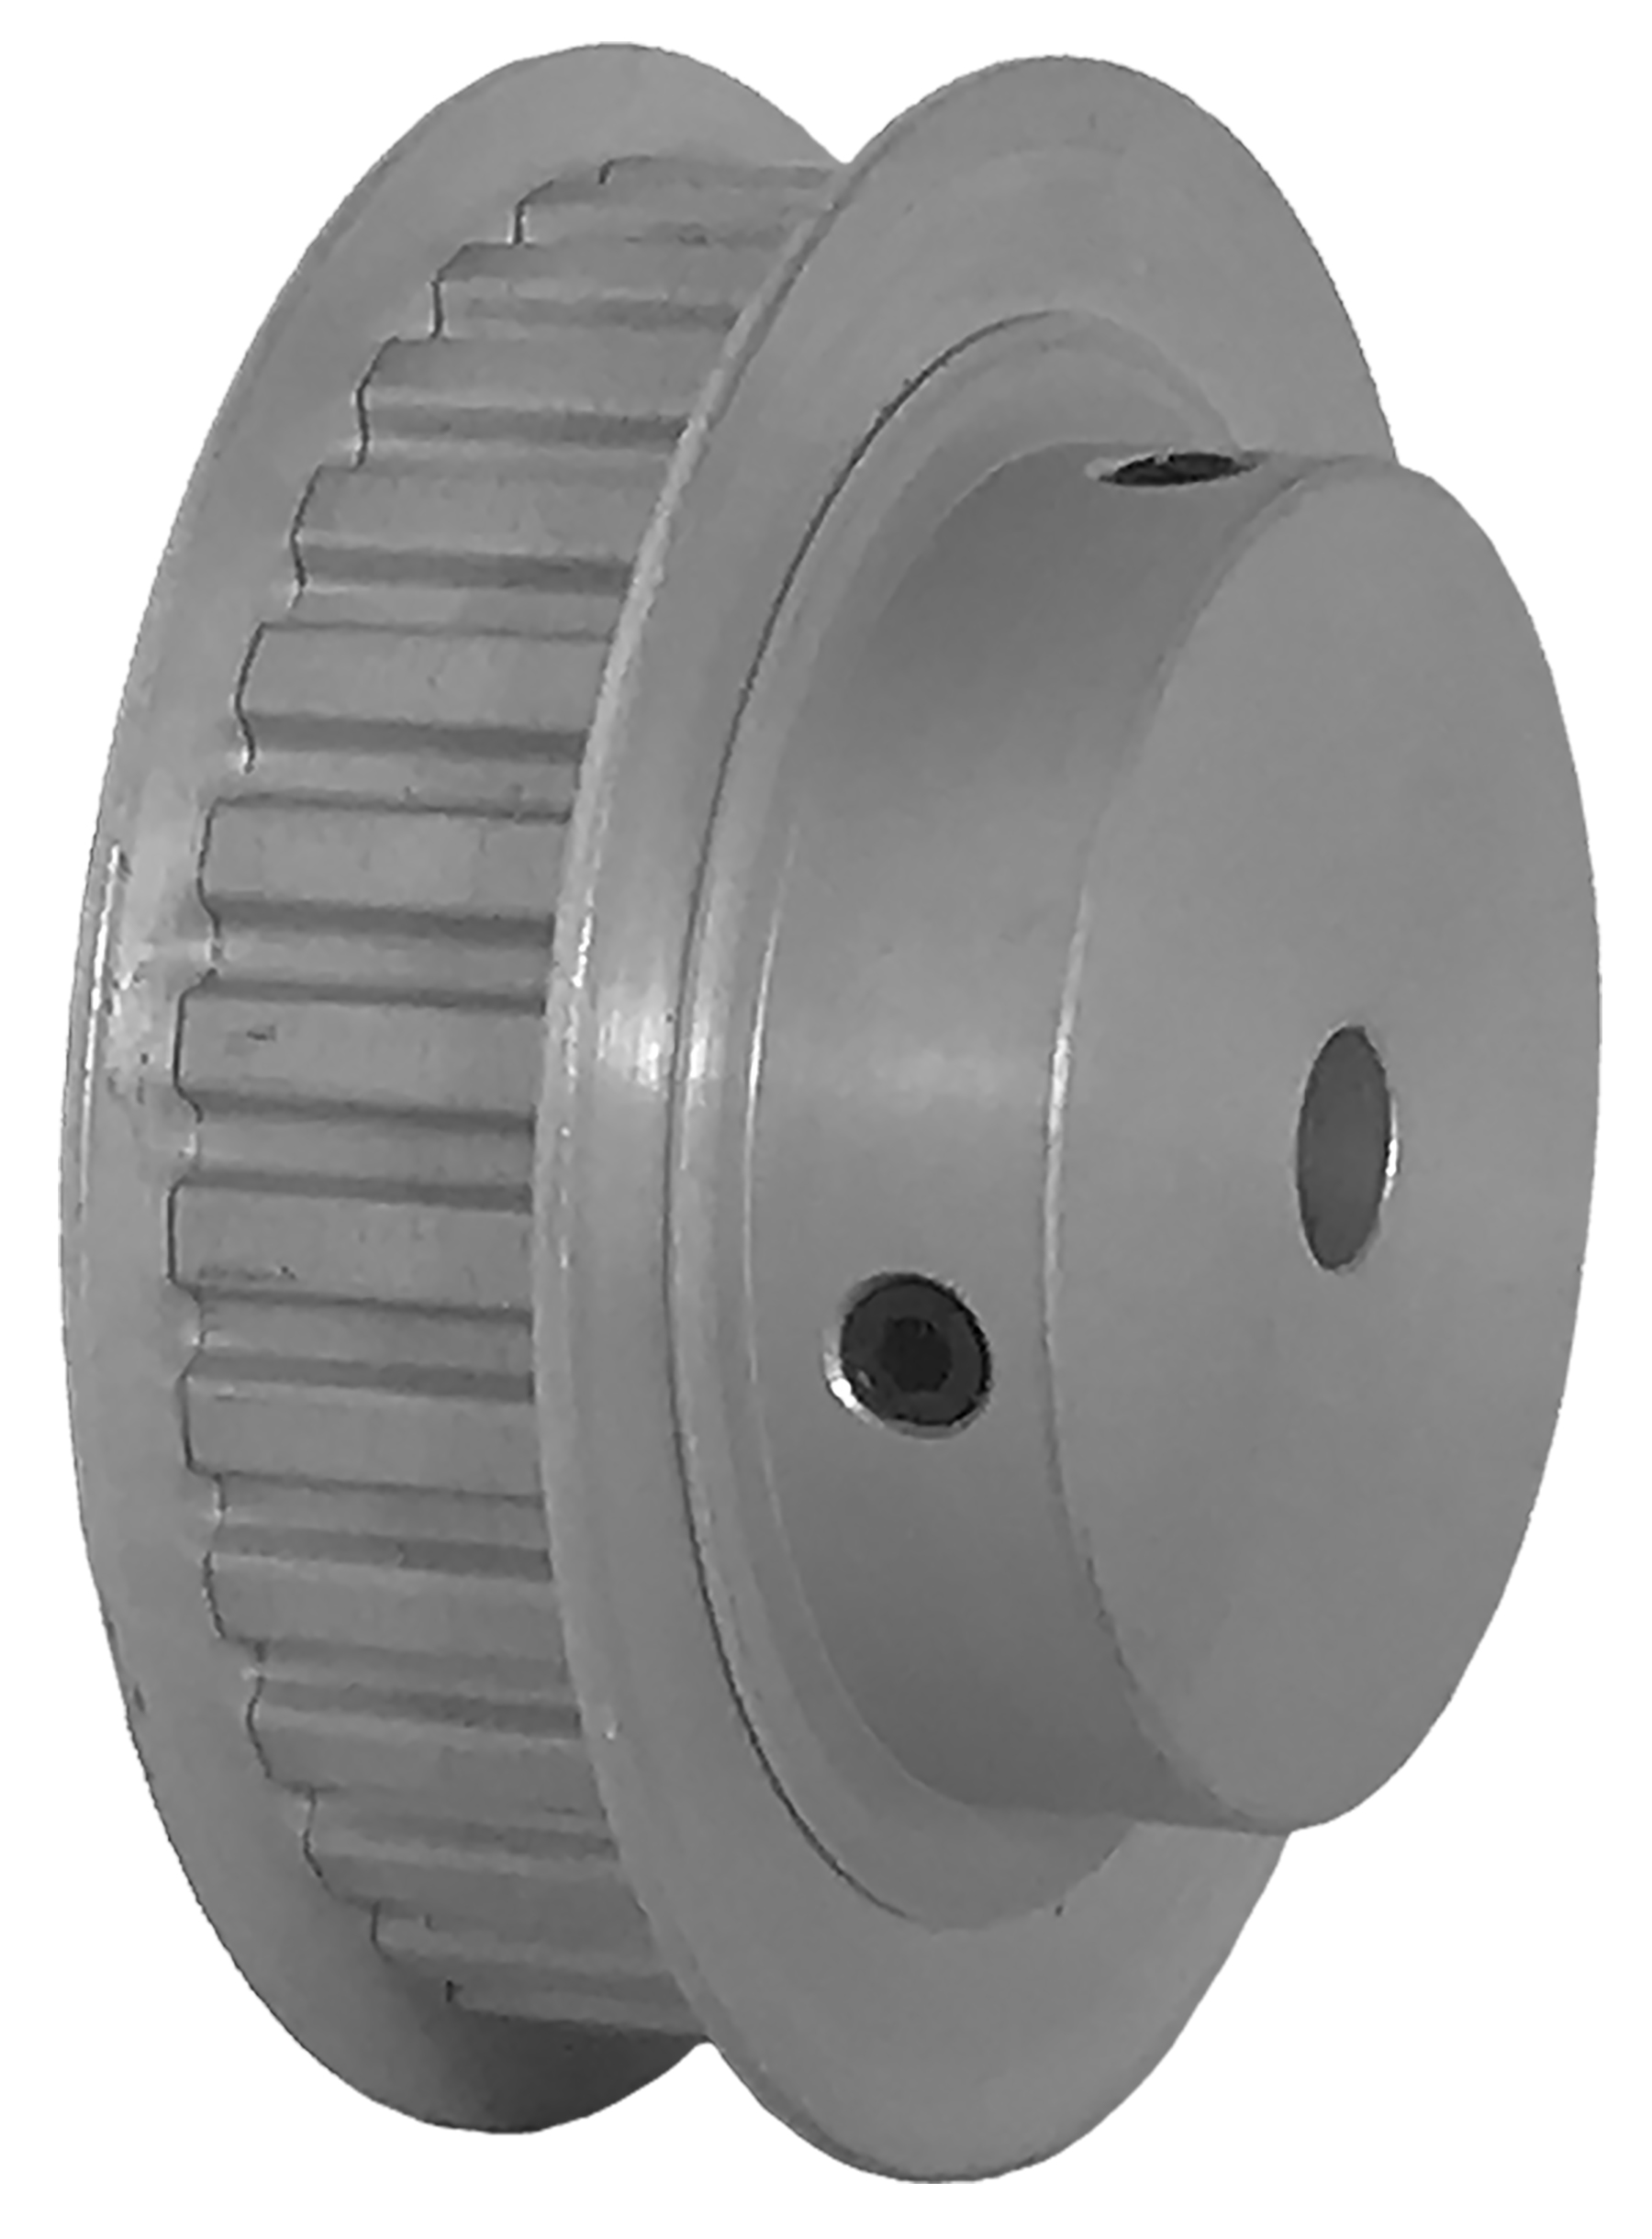 32XL037-6FA3 - Aluminum Imperial Pitch Pulleys